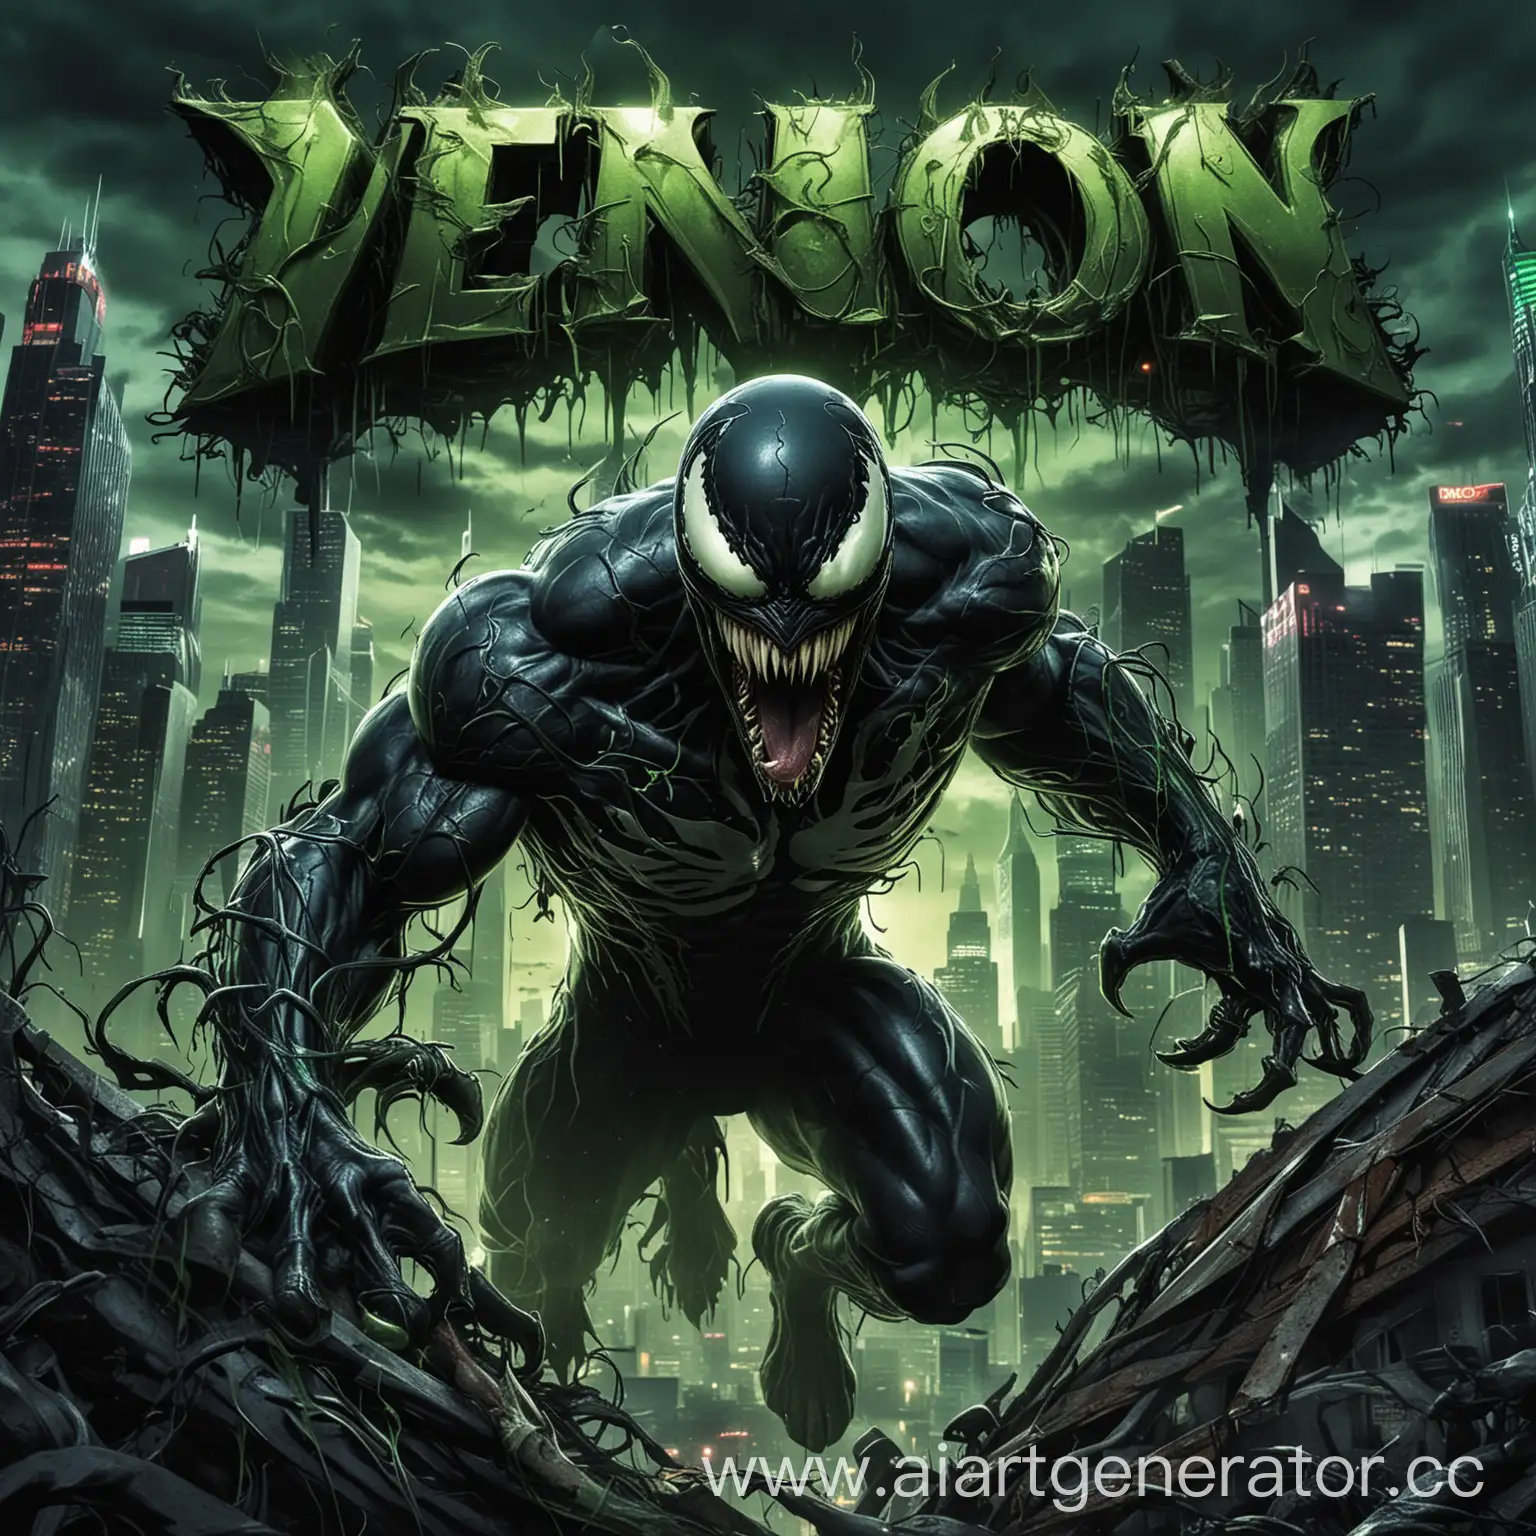 The cover features the menacing presence of Venom, his sharp teeth and glowing eyes drawing the viewer in. In the background, a cityscape is bathed in an eerie green light, hinting at the chaos and destruction that Venom brings with him. The words "Venom 3: The Last Dance" are emblazoned across the top in bold, dripping font, promising an epic showdown to end it all.  Overall, the cover sets the tone for a thrilling and action-packed conclusion to the Venom trilogy.